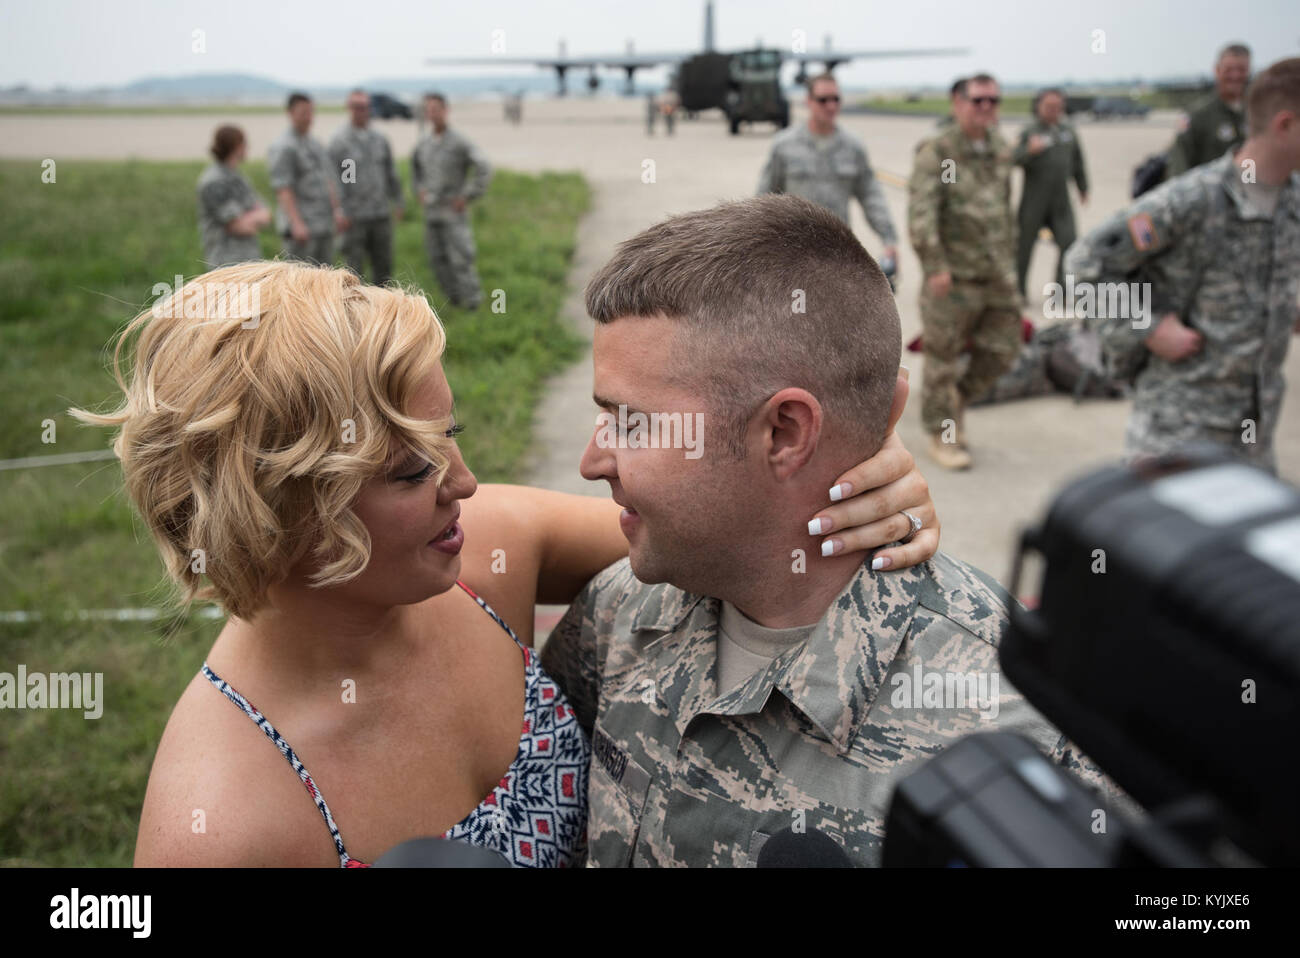 Tech. Sgt. Mike Johnson, a C-130 crew chief in the 123rd Airlift Wing, proposes to his girlfriend, Vanna Jones, on the flight line of the Kentucky Air National Guard Base in Louisville, Ky., July 4, 2015, after returning from a deployment to the Persian Gulf region. Jones said yes. (U.S. Air National Guard photo by Maj. Dale Greer) Stock Photo